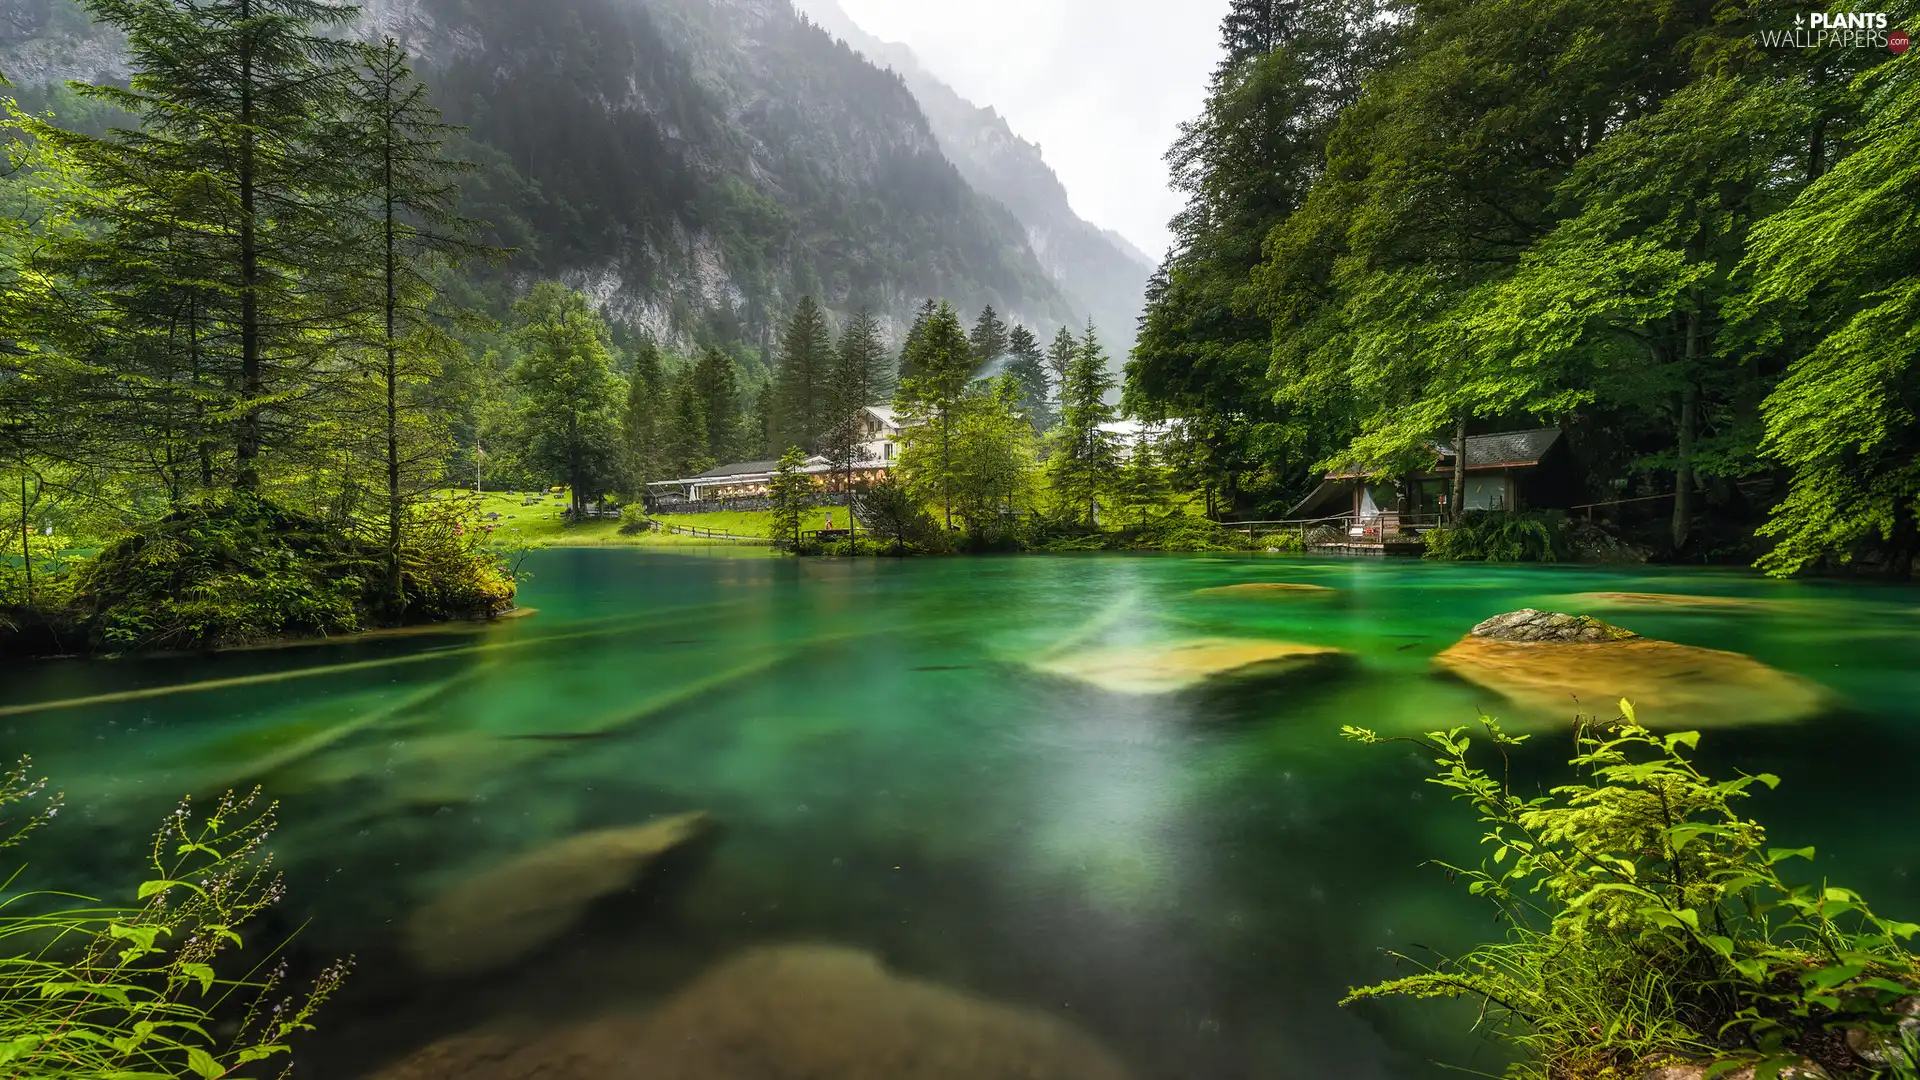 Canton of Bern, Switzerland, Blausee Lake, Mountains, trees, viewes, Stones, forest, Houses